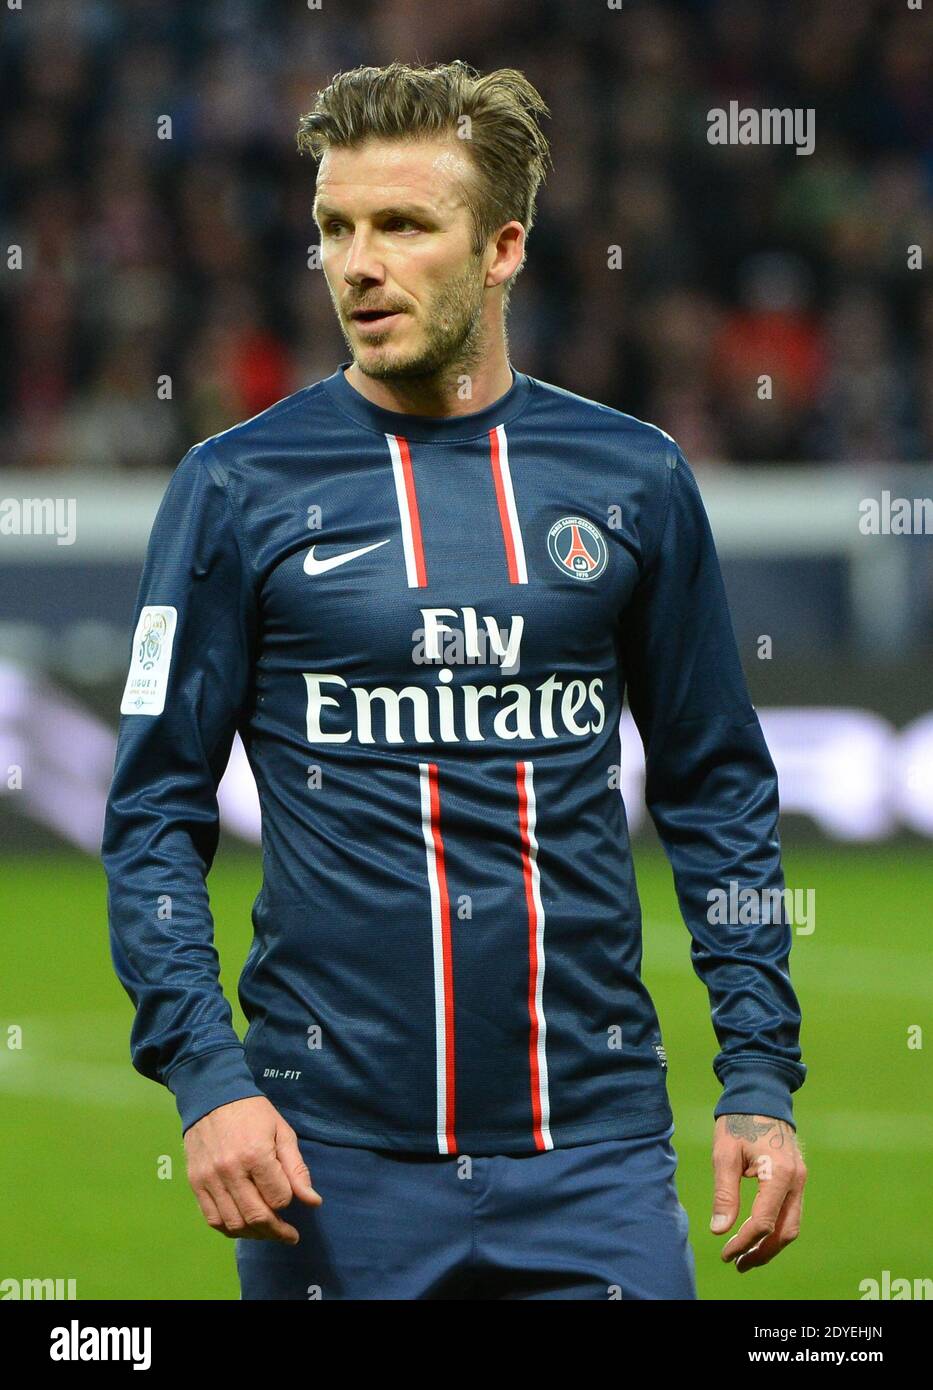 PSG's David Beckham during the French First League soccer match, PSG vs  Nancy in Paris, France, on March 9th, 2013. PSG won 2-1 Photo by  ABACAPRESS.COM Stock Photo - Alamy